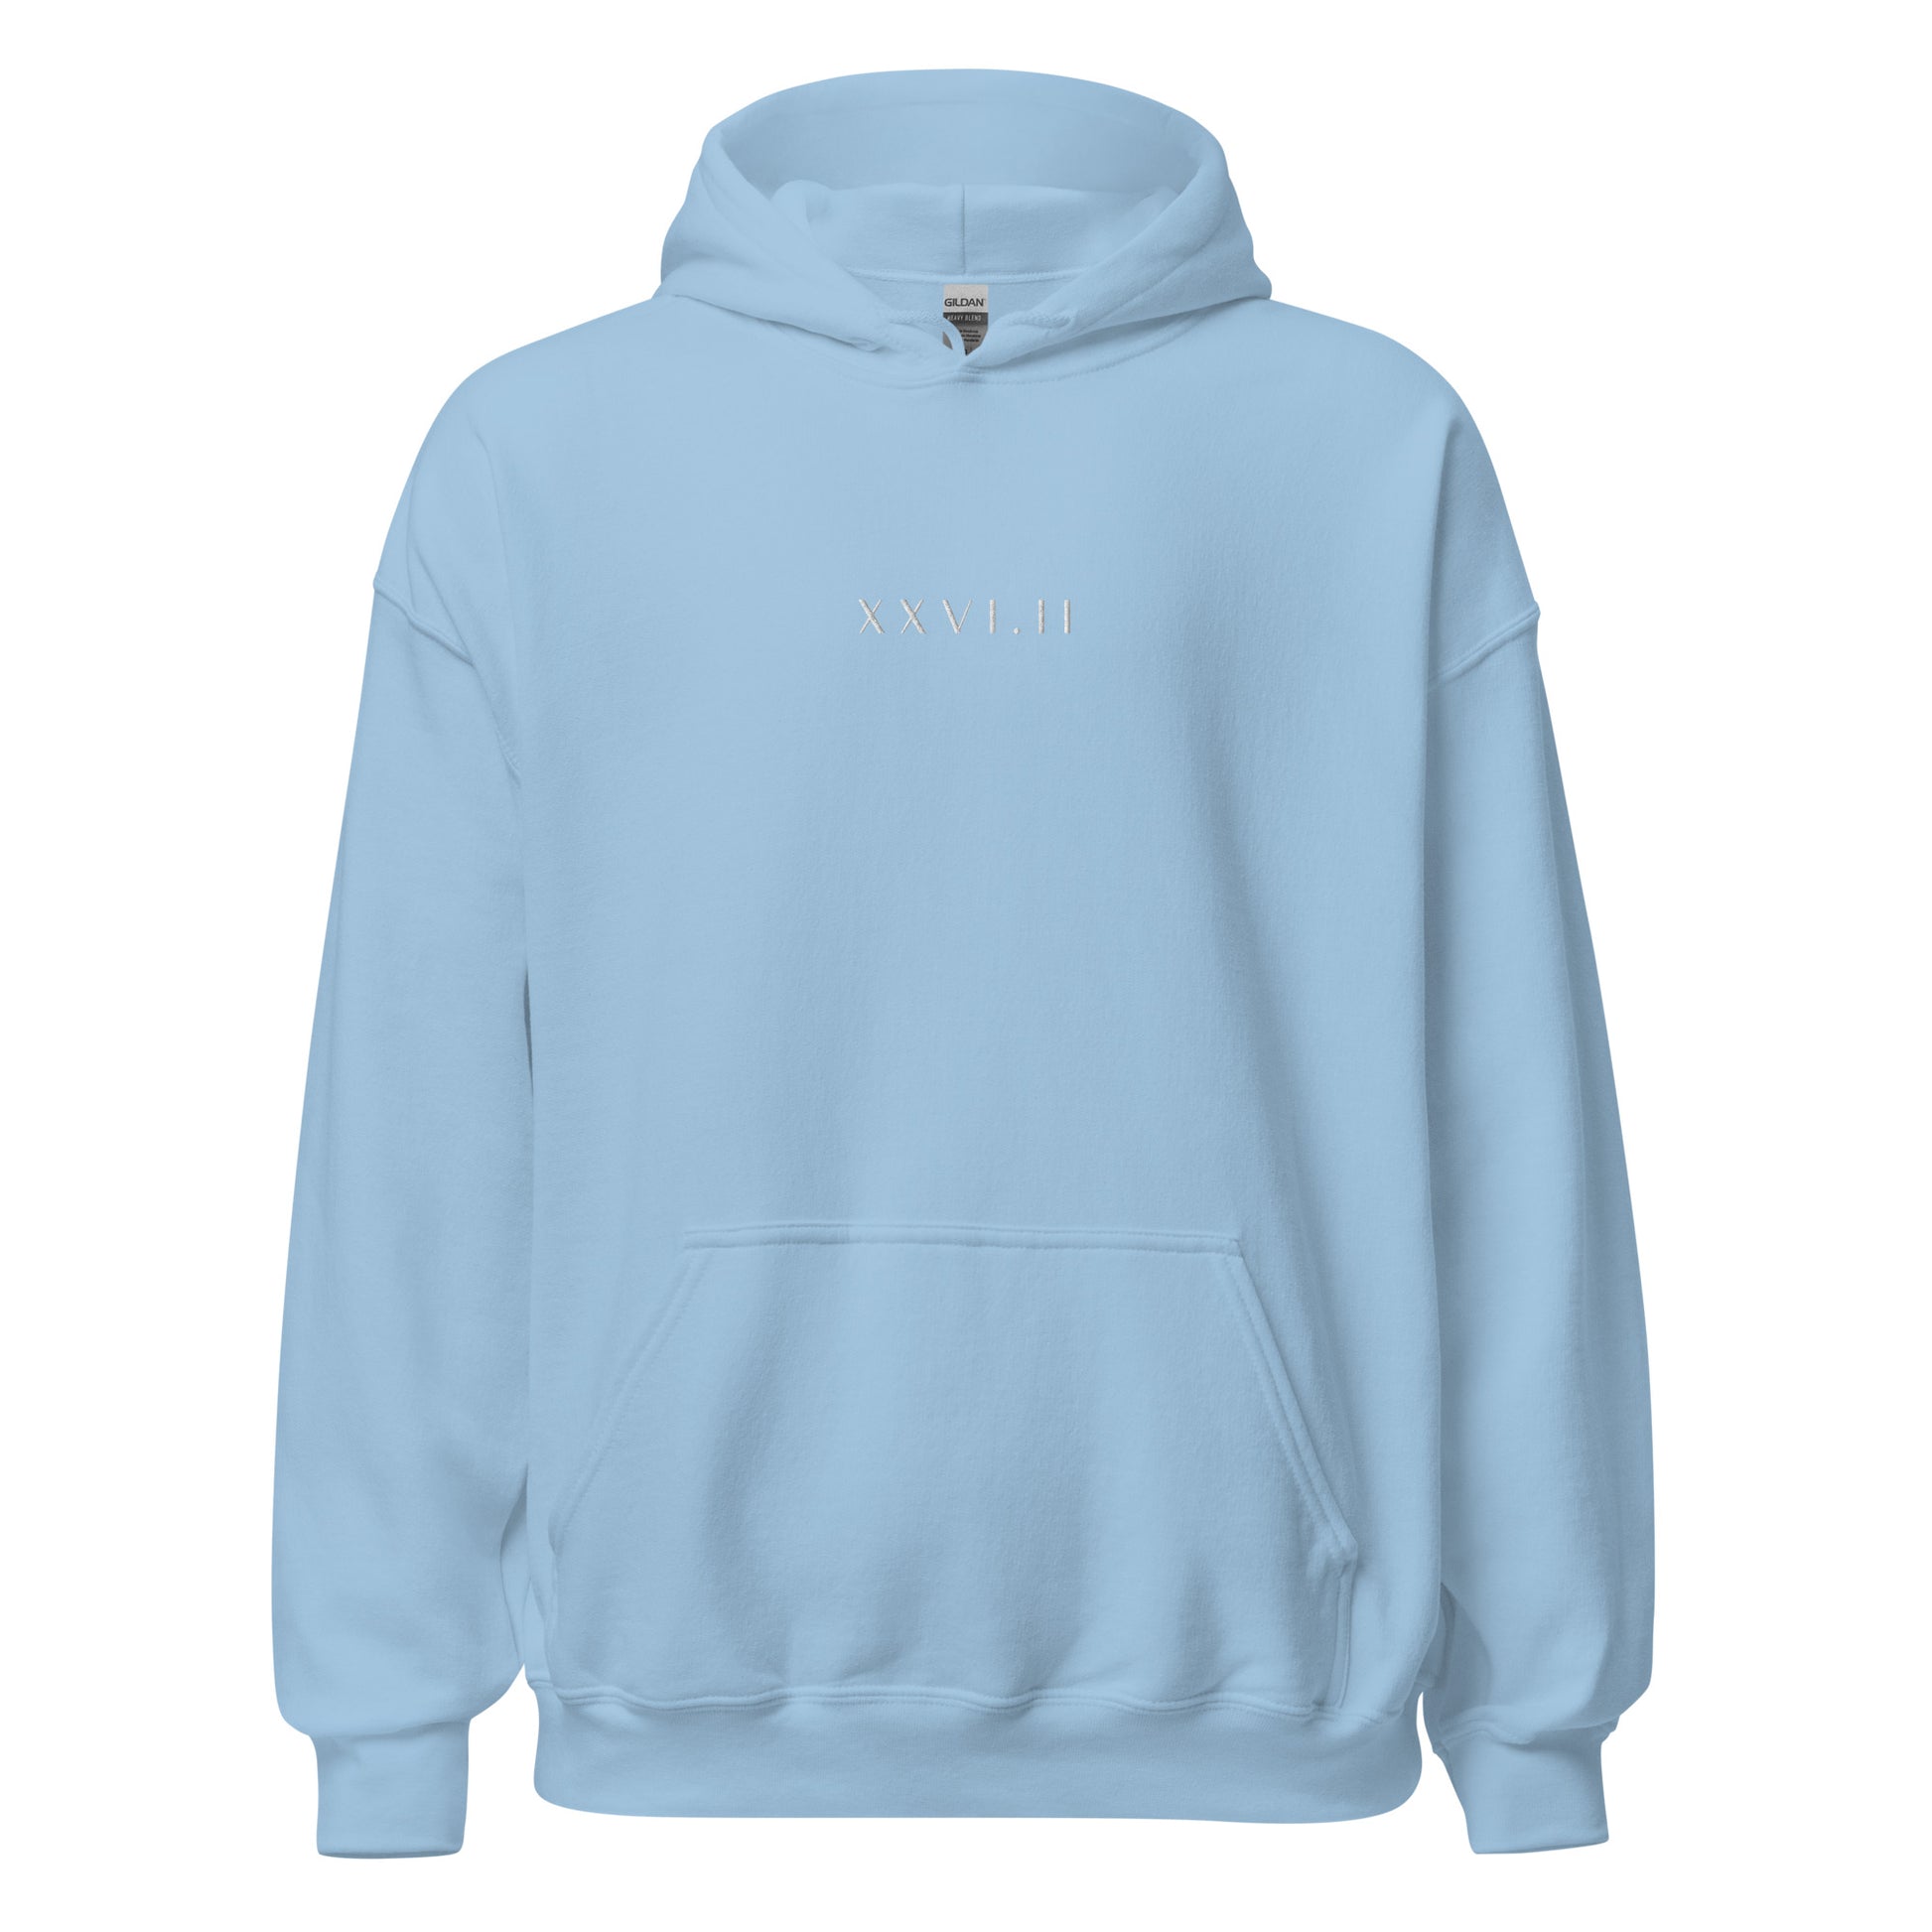 light blue hoodie with XXVI.II 26.2 marathon distance in roman numerals in a small, white font embroidered across the chest